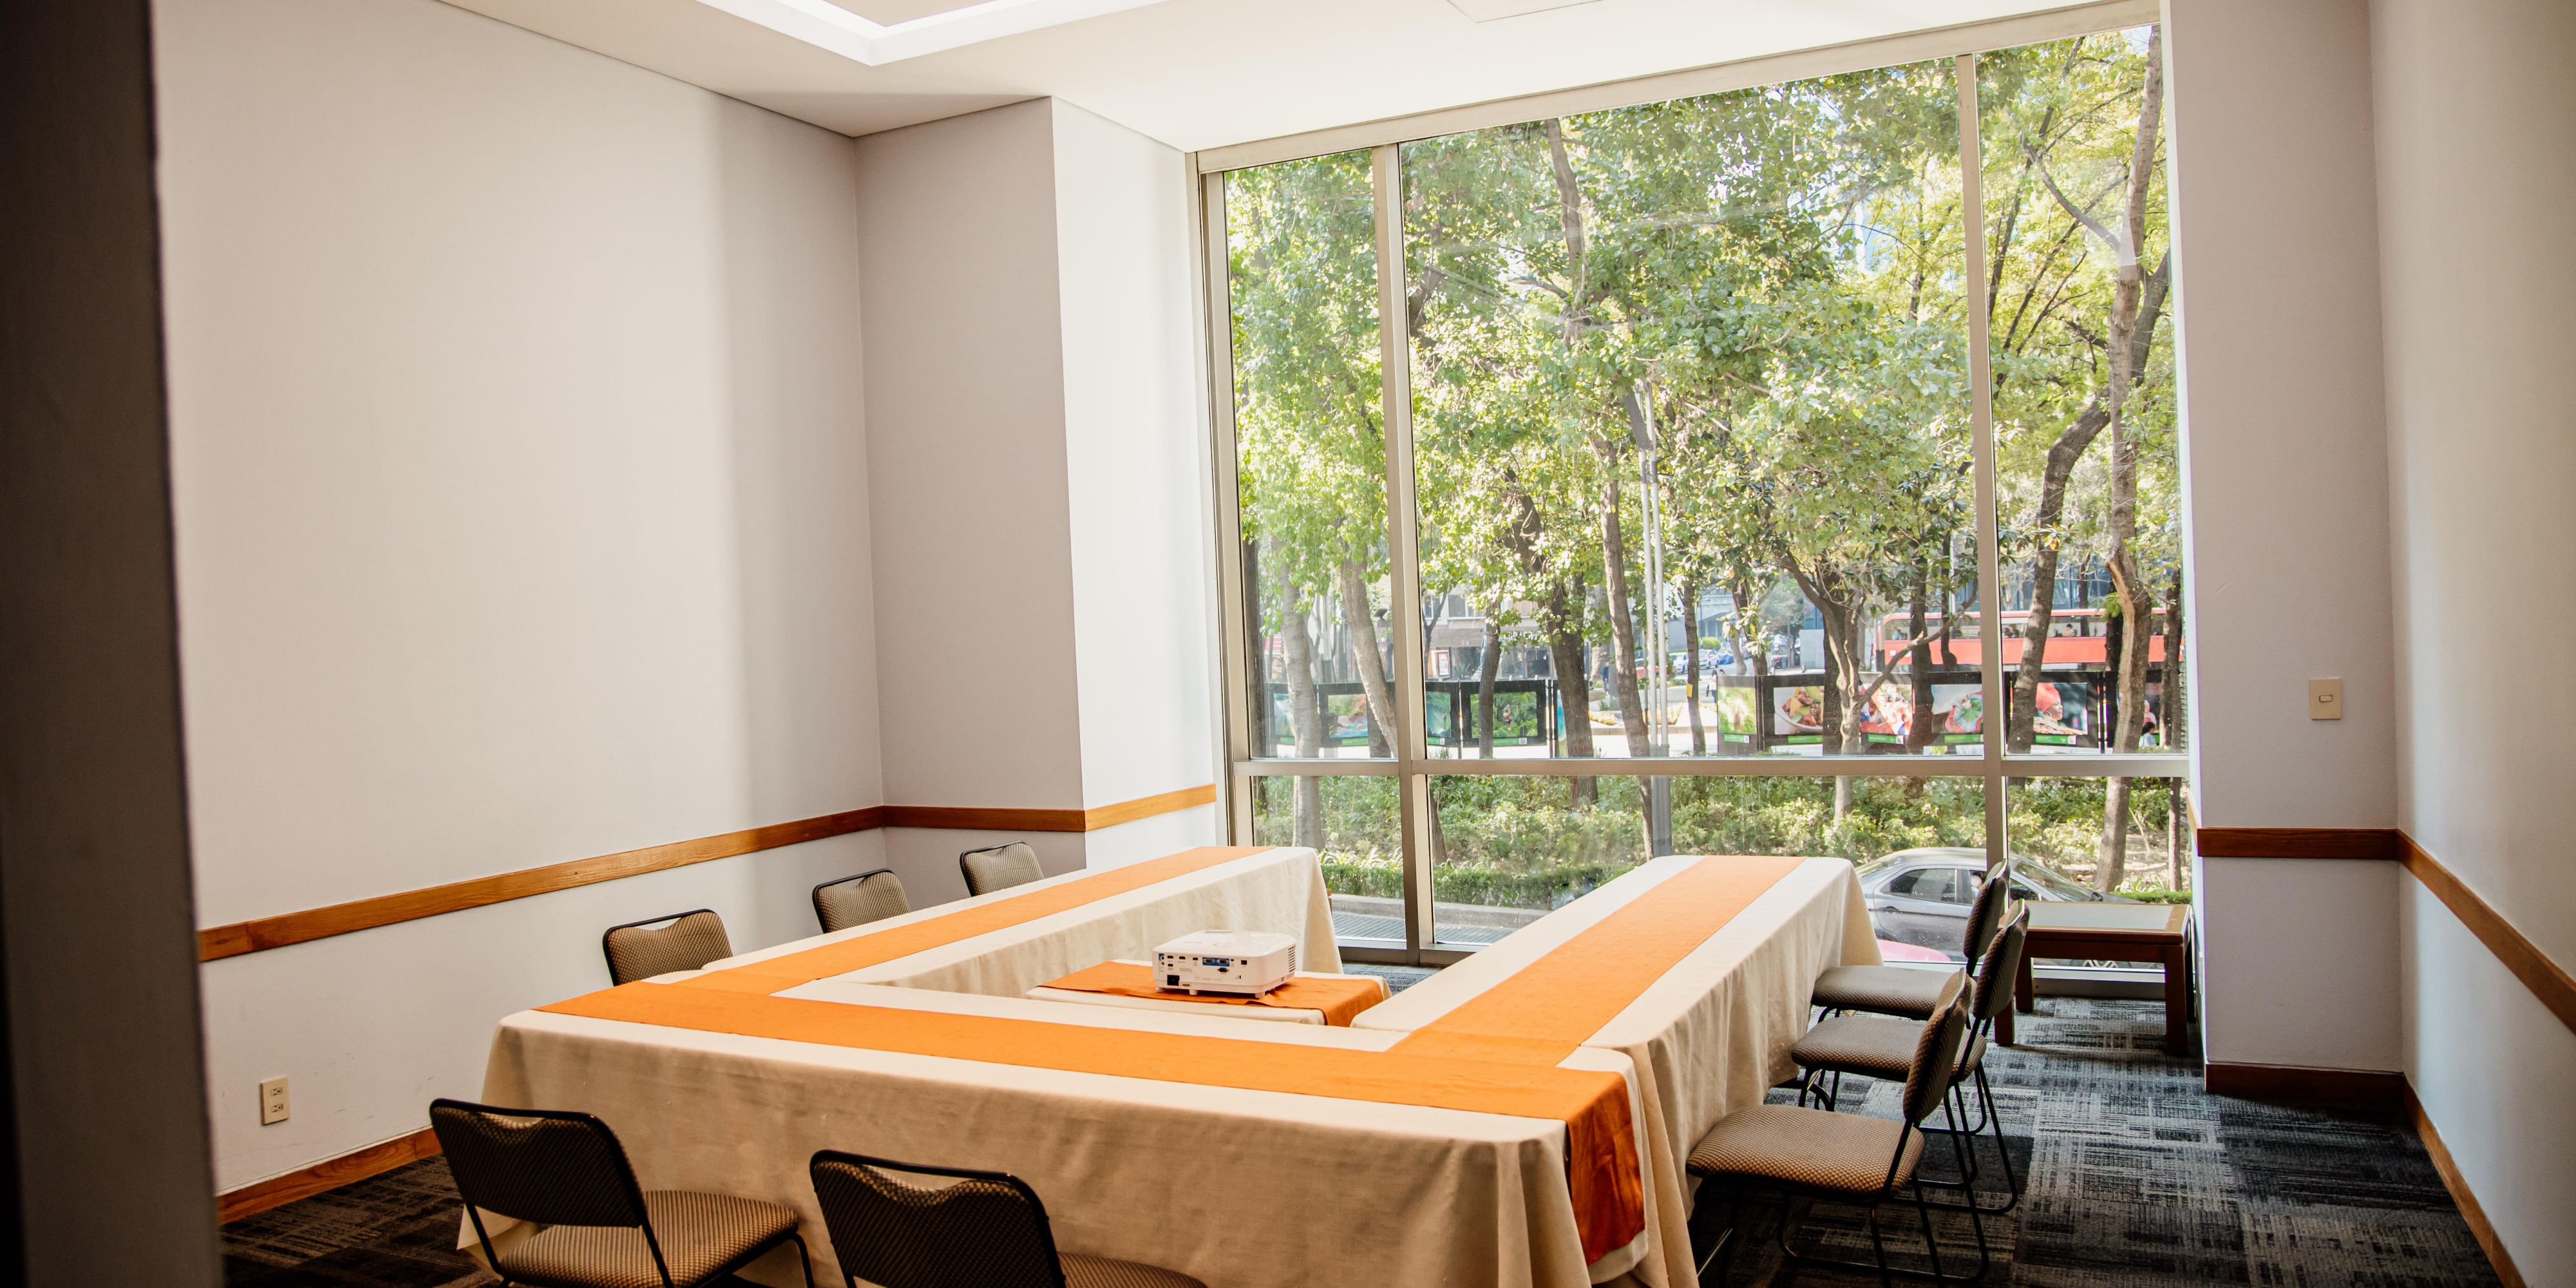 Come and taste our versatile 332 square feet of space for your next event. Perfect for small to medium-sized groups with capacity of 35 people, we will help you with every detail to make your meeting event sucessfull!